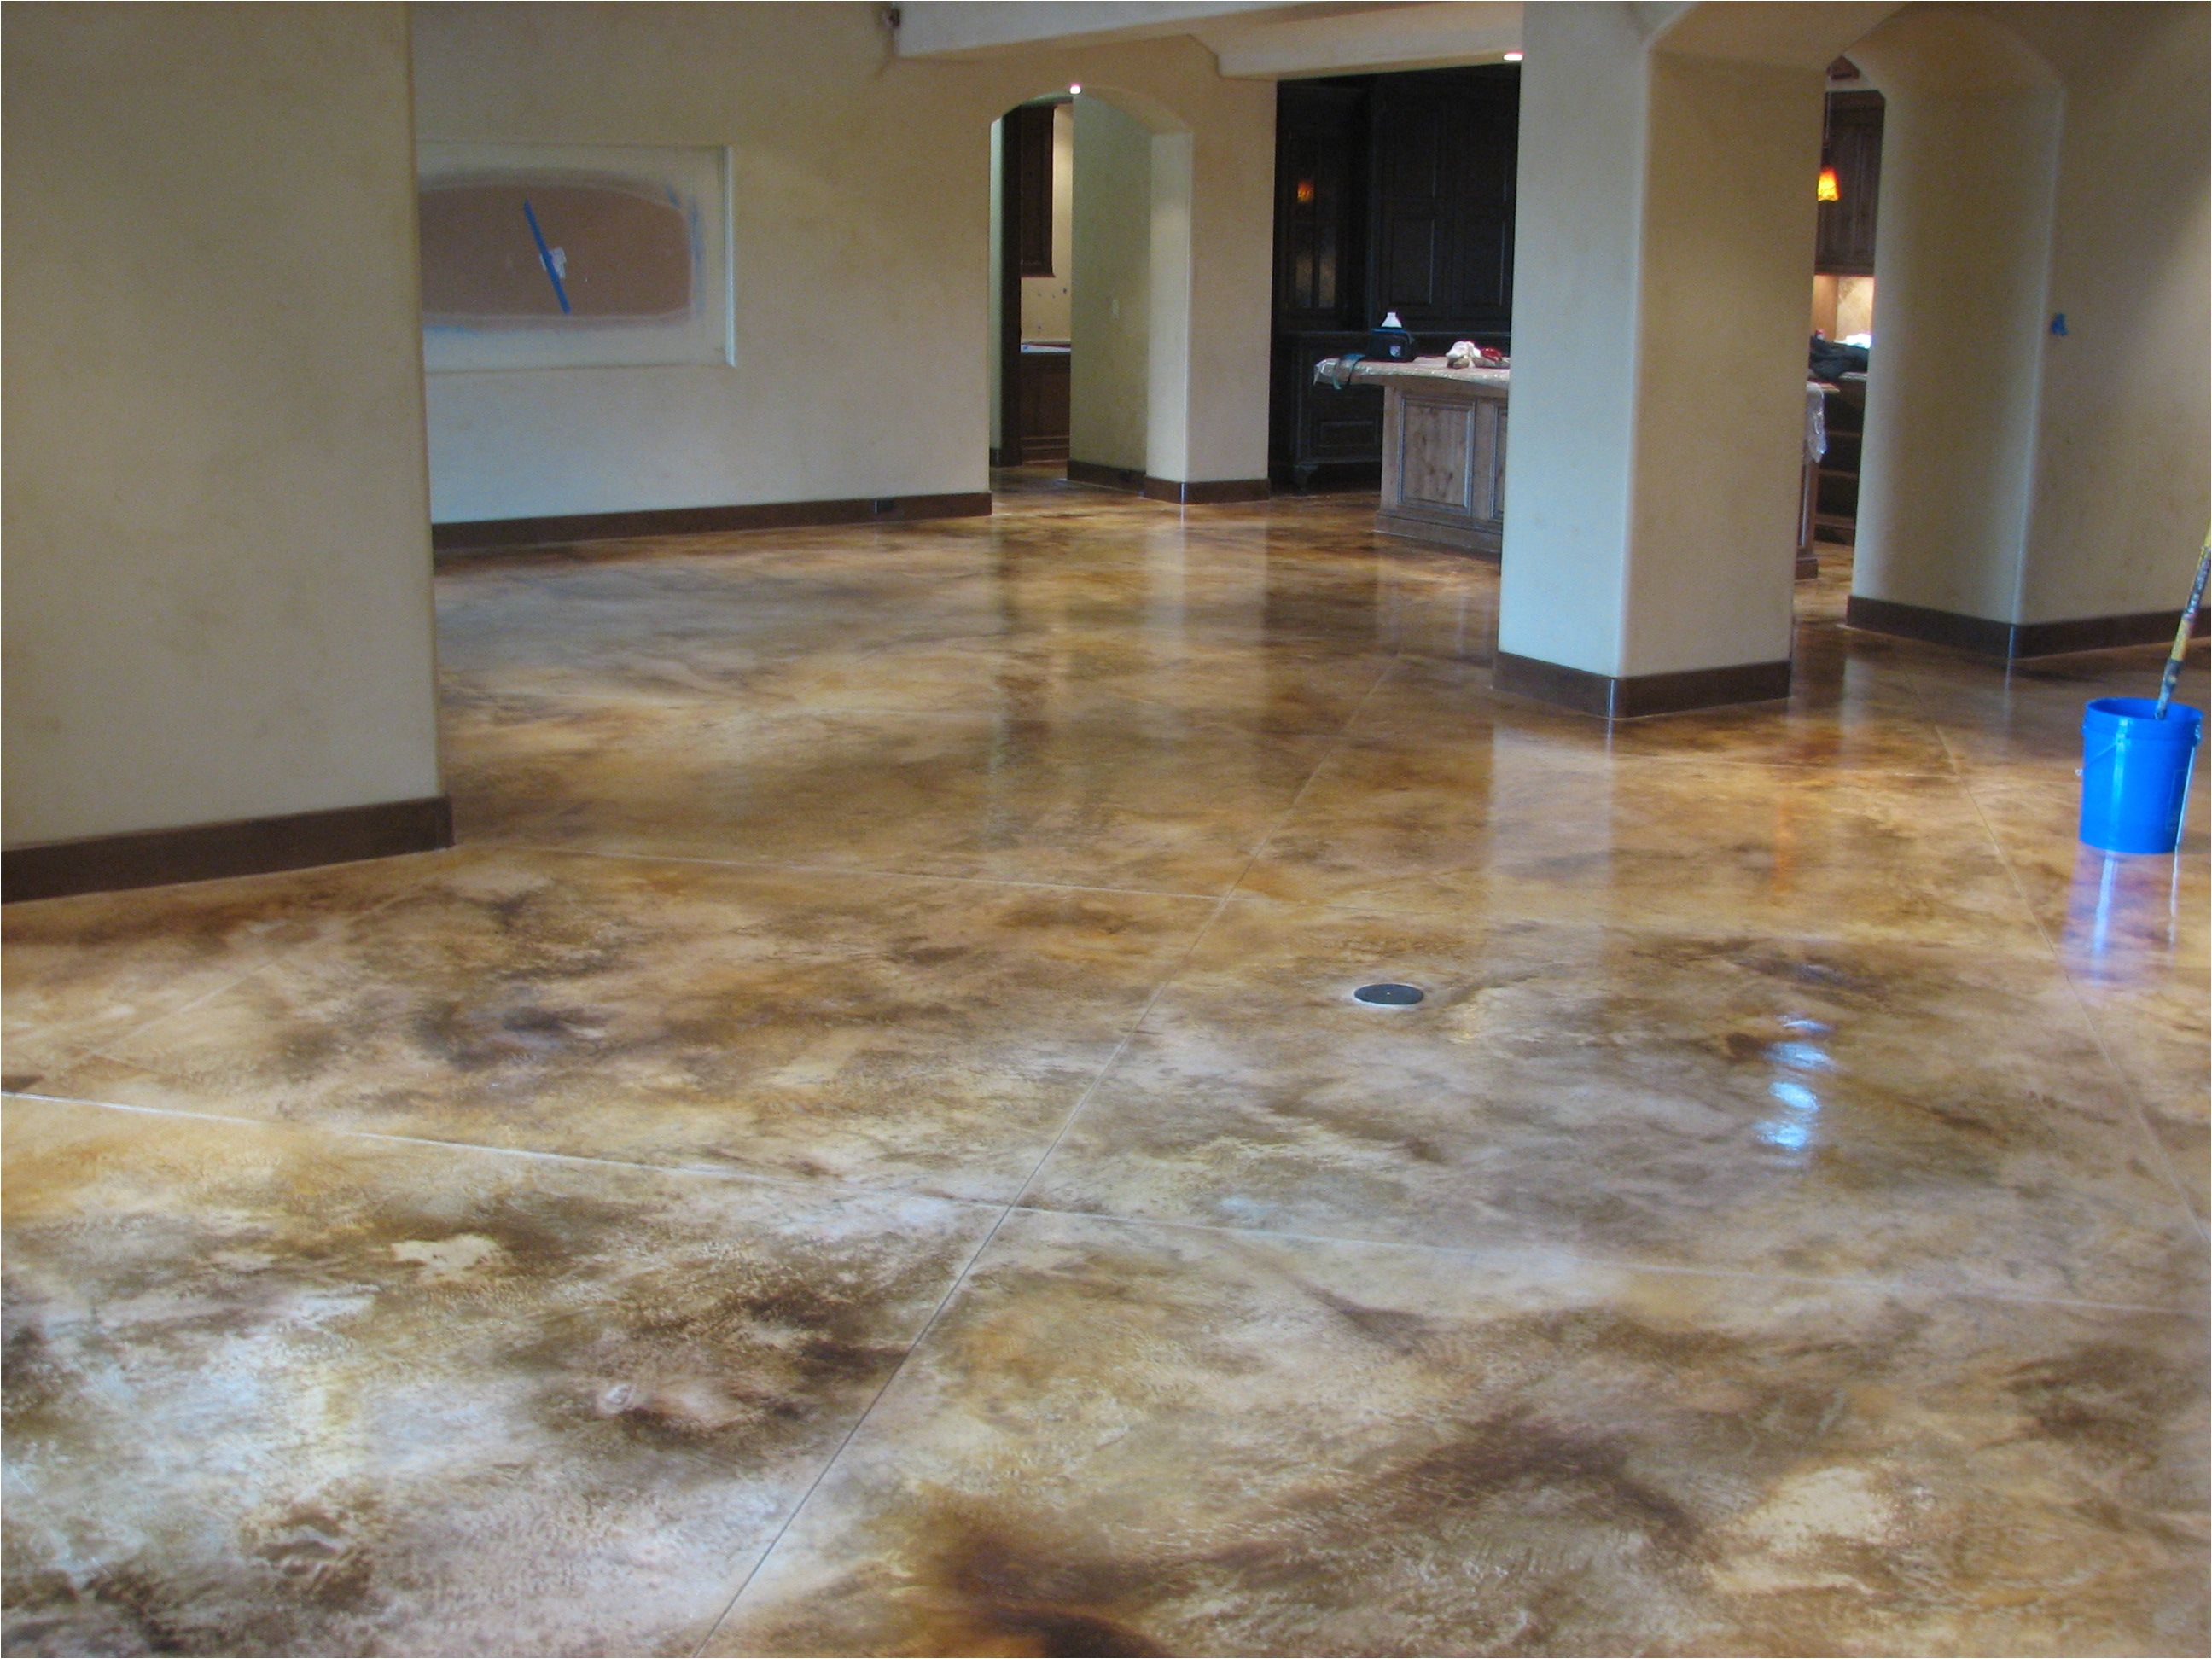 Concrete Floor Finishes Do It Yourself Photos Of Concrete Dye This is A Brown Acid Stain On Raw Concrete